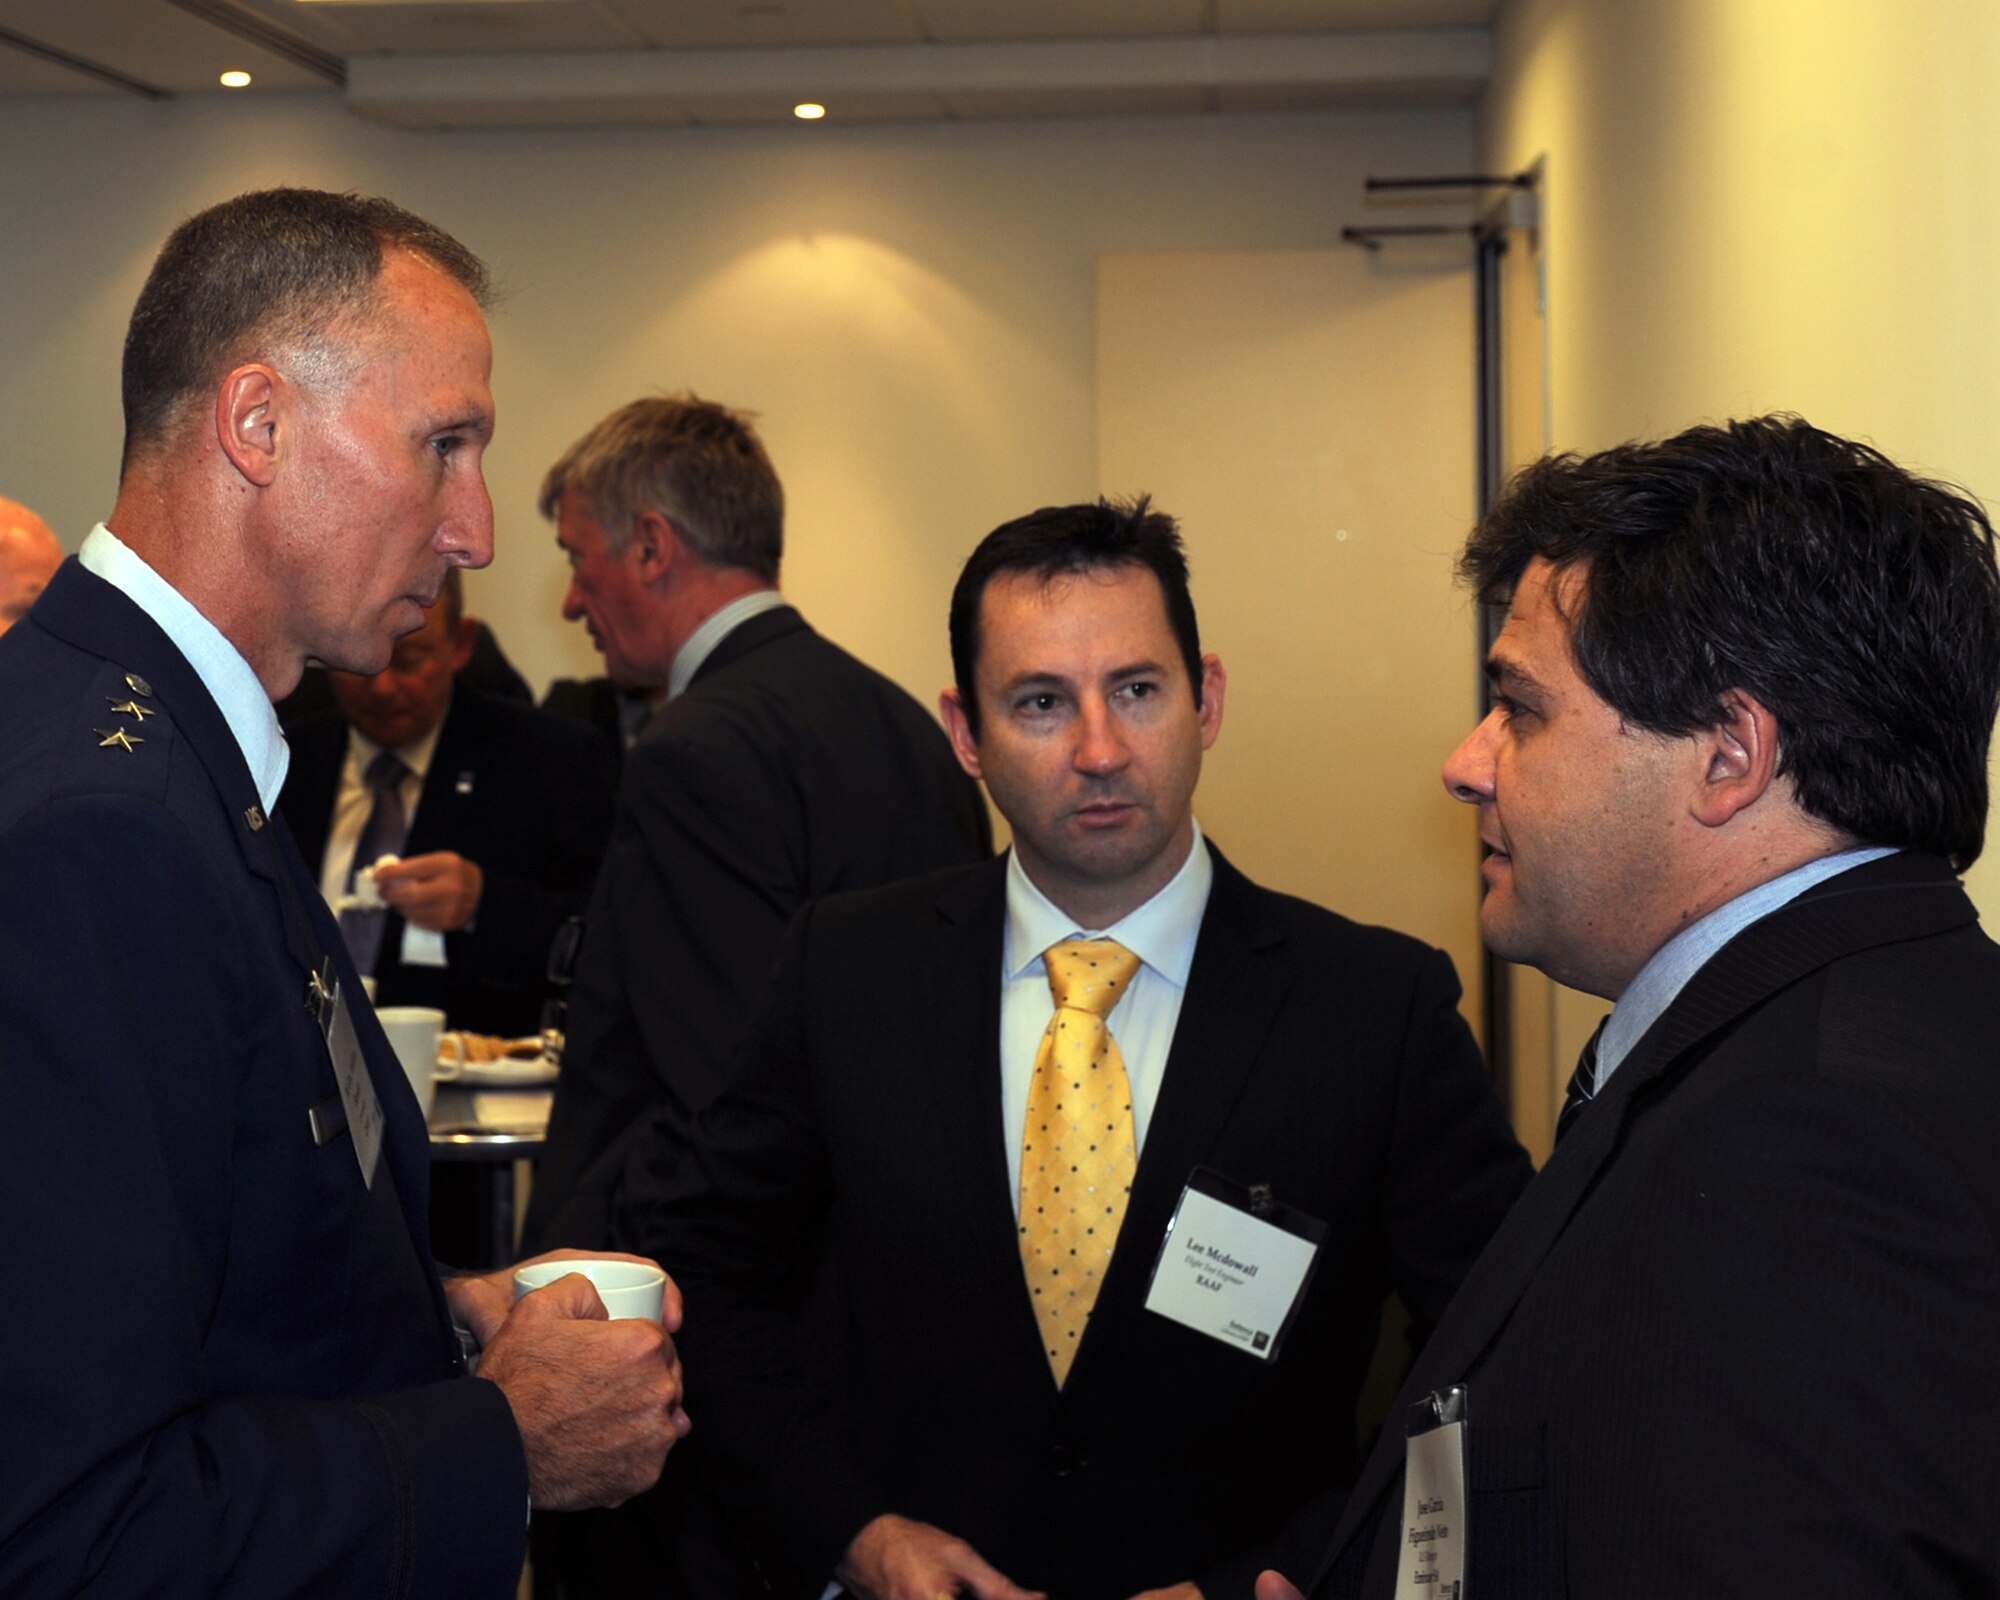 From left, Maj. Gen. William Bender, U.S. Air Force Expeditionary Center commander, discusses the future of airlift with Lee McDowall, Royal Australian Air Force flight test engineer, and Jose Garcia Figueiredo Neto of Embraer Sociedad Anonima, at the Military Airlift event in London, Sept. 26, 2012. Key topics of discussion focused on ways to more effectively conduct military airlift operations. The general elaborated on the future of the C-130J Super-Hercules program, the KC-46 fleet and how NATO and the U.S. could ill afford to throw teamwork by the wayside. Additionally, Bender made a site visit to RAF Mildenhall’s 727th Air Mobility Squadron, a tenant unit there under his chain of command. (U.S. Air Force photo/2nd Lt Christopher Mesnard)